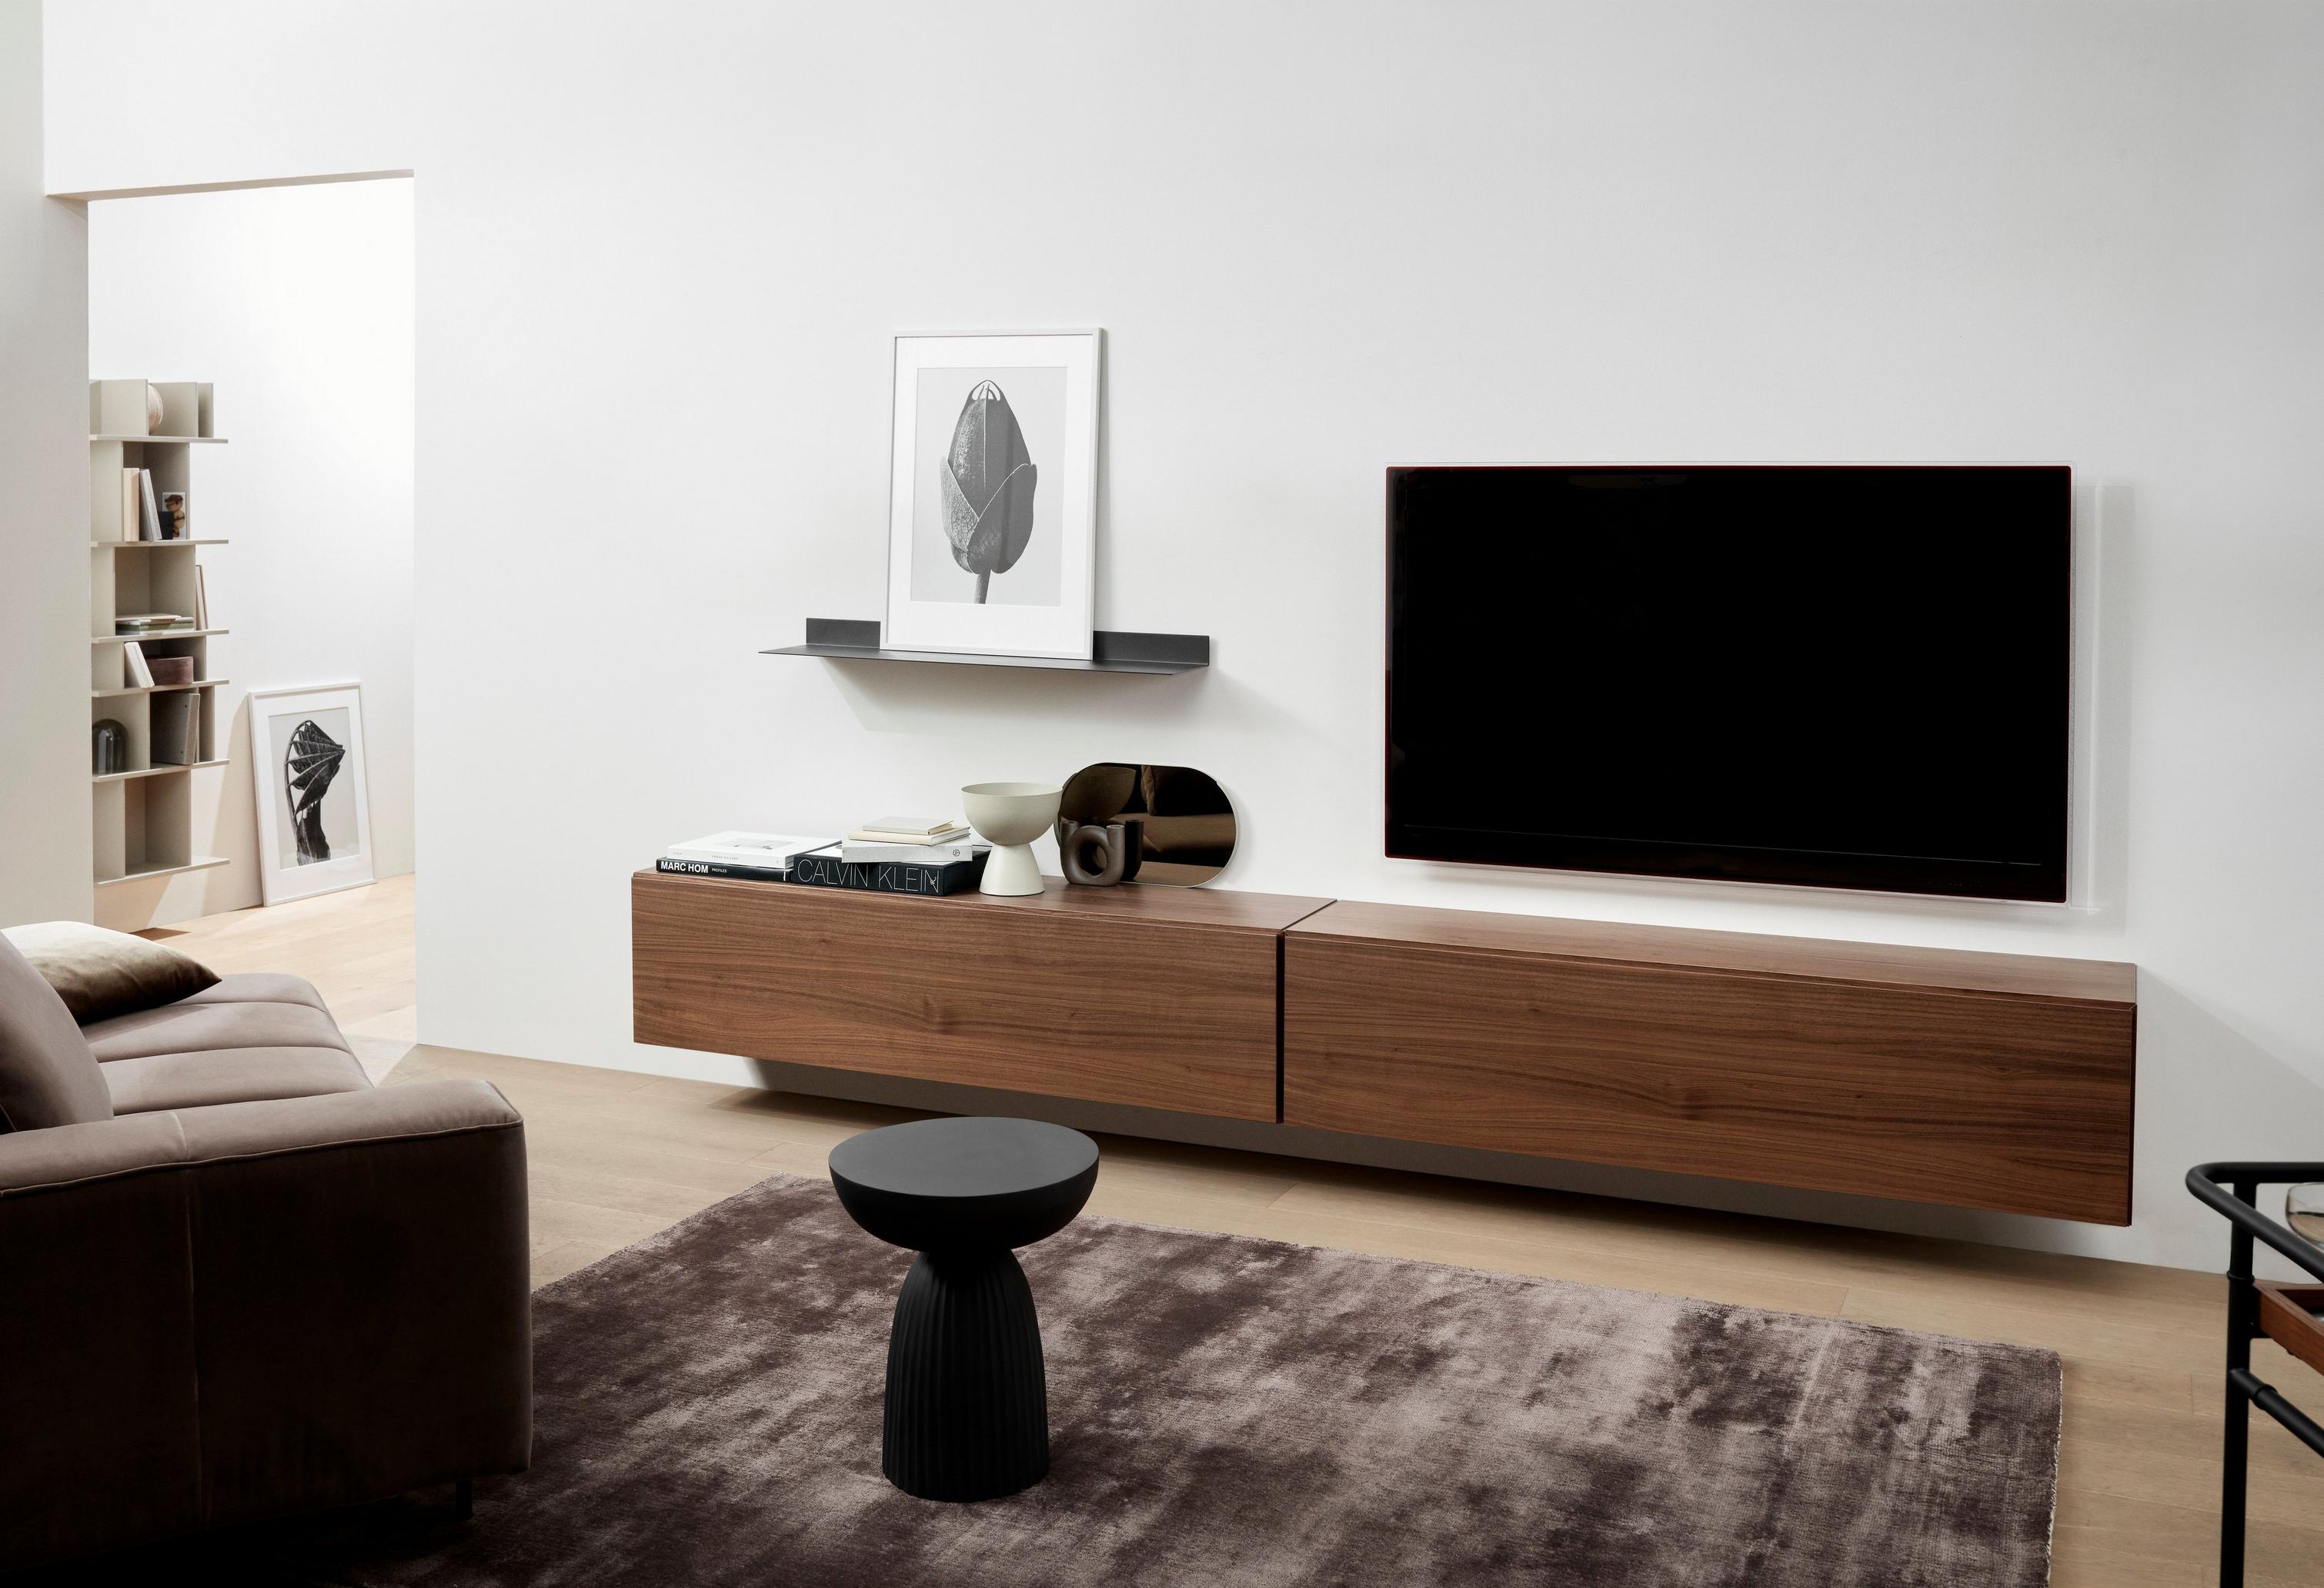 Modern living room with a wooden TV console, black stool, artwork, and a glimpse of a bookshelf.